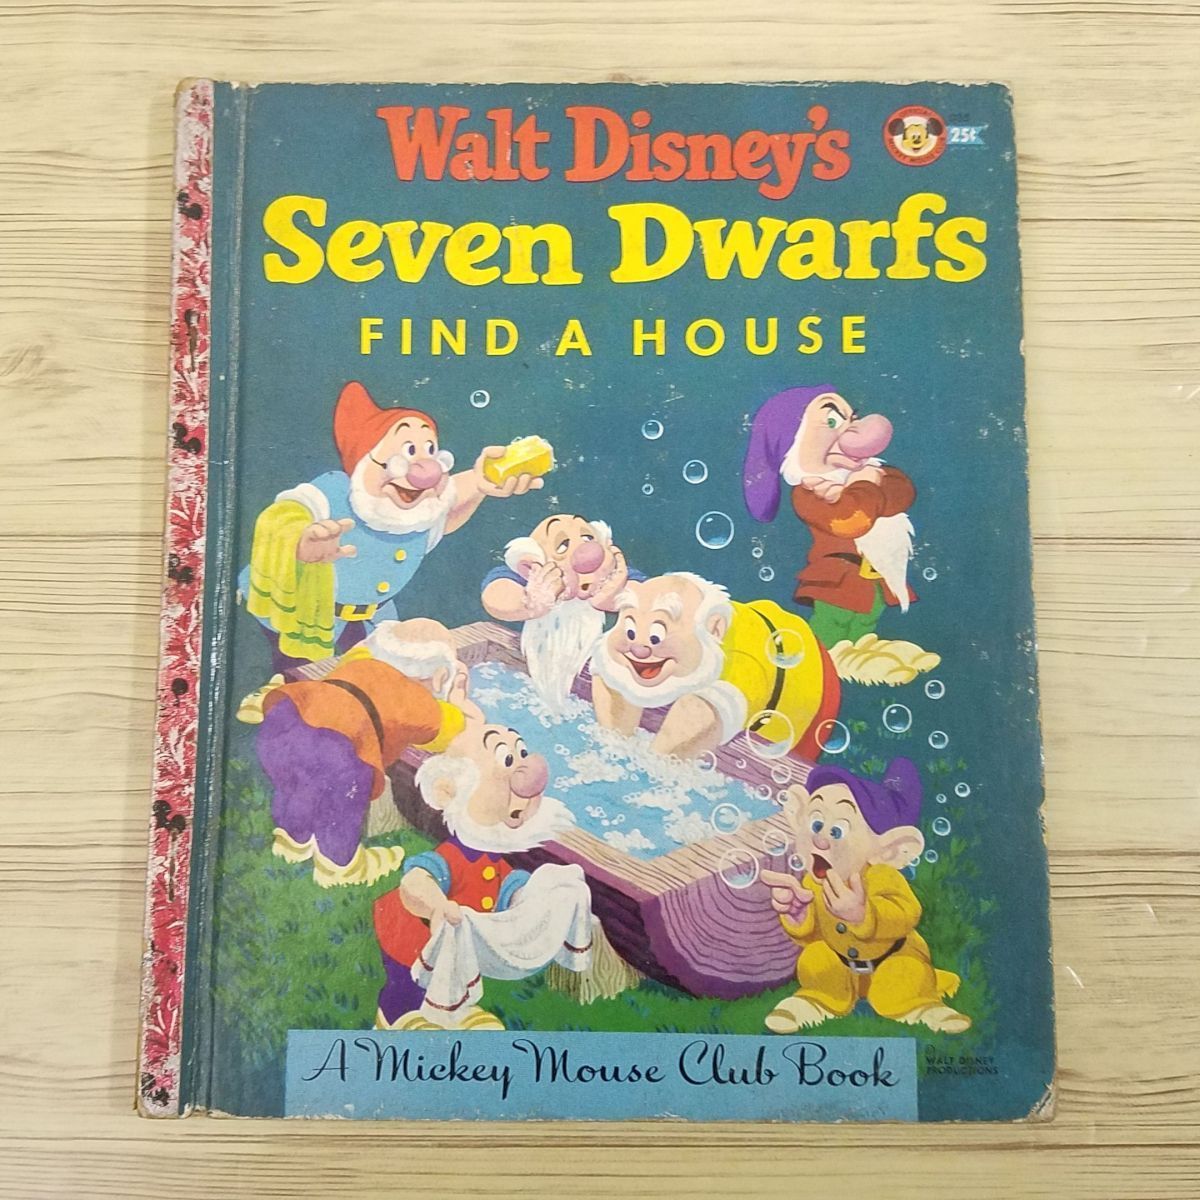  foreign language picture book [ Disney Snow White 7 person. .... house ...Seven Dwarfs FIND A HOUSE] 1952 year? Vintage Disney picture book 